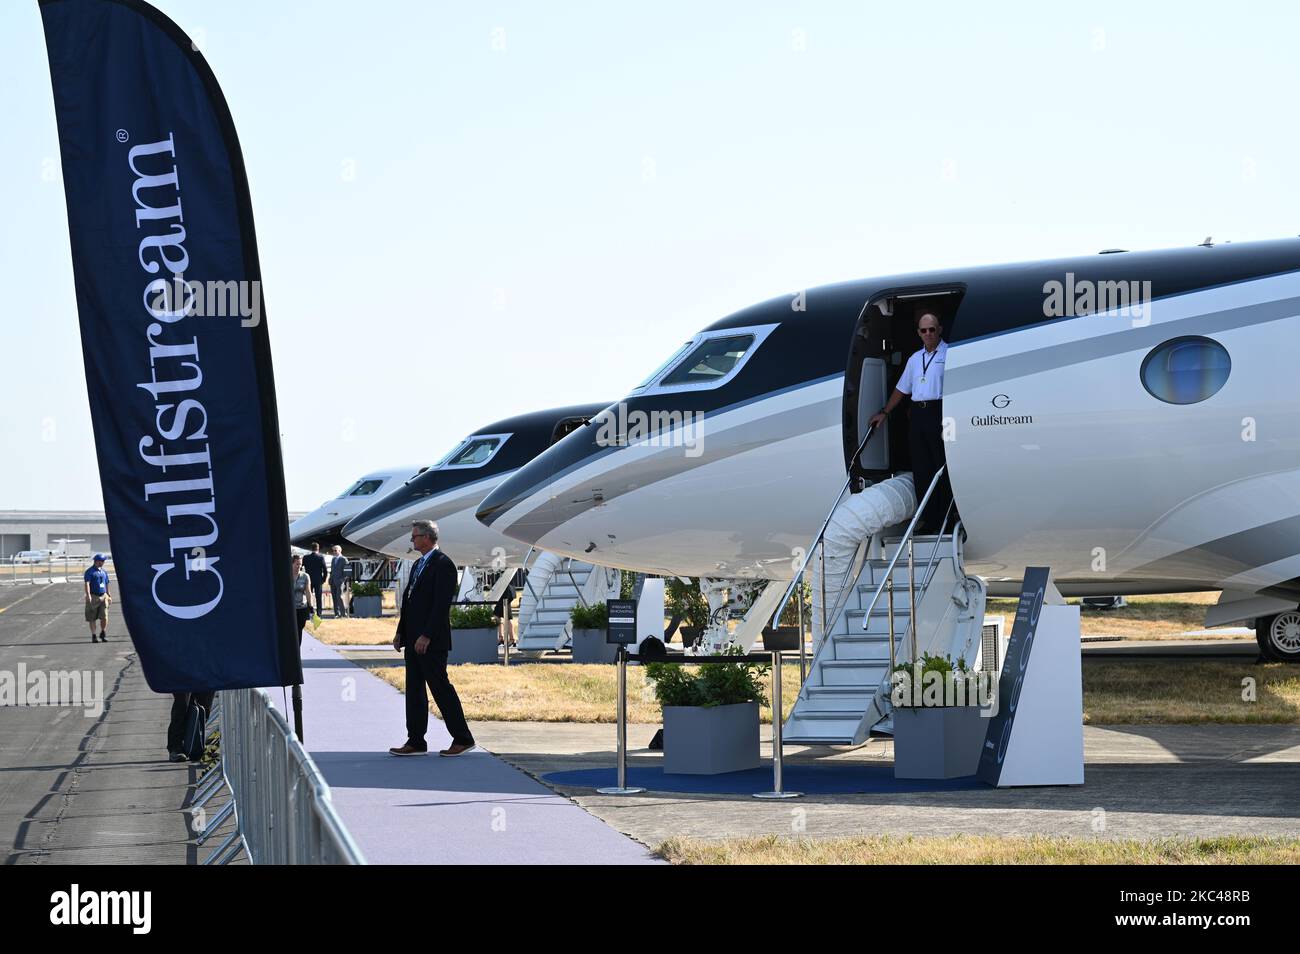 A view of Farnborough International Airshow- Gulfstream Private jet displayed at the event Stock Photo